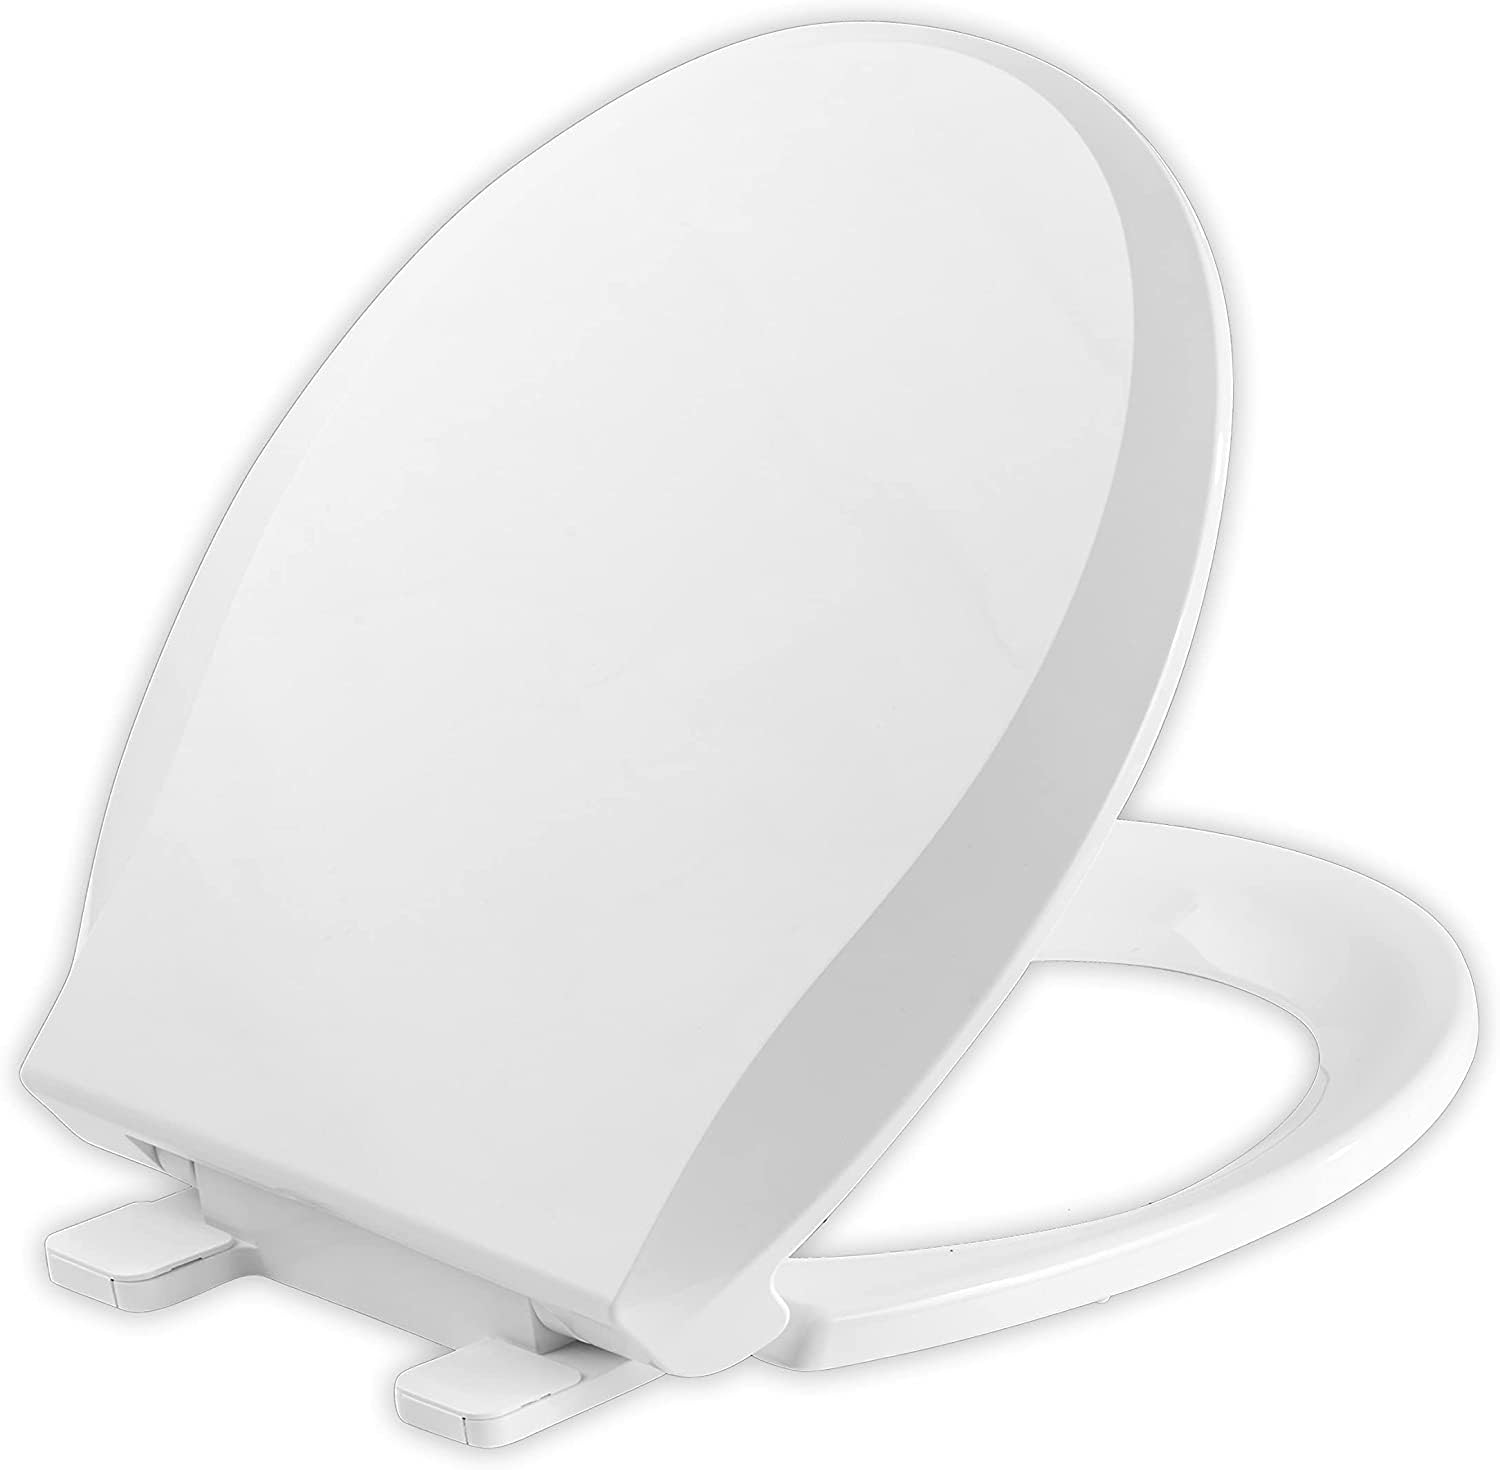 JINGZE Round Toilet Seat with Slow Close Standard Toilet Seat,Quiet Toilet Cover Seat Toilet Lid Durable Refused to Loosen Easy to Install & Clean,White